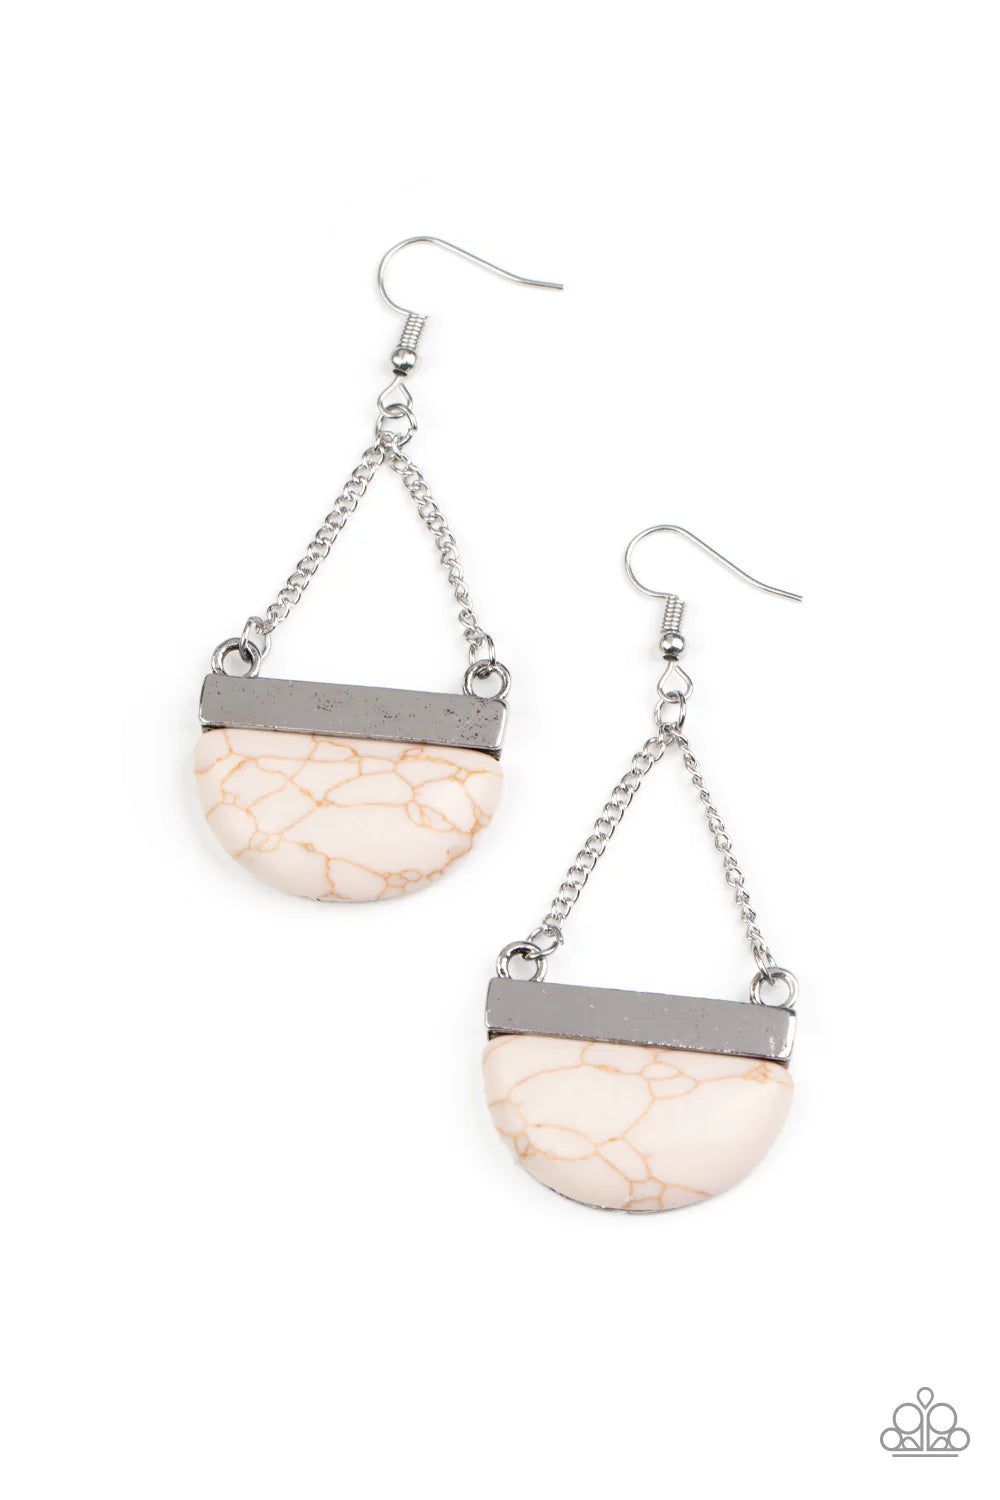 Paparazzi Accessories Mesa Mezzanine - White Chiseled into a half moon, an earthy white stone attaches to a rectangular silver frame at the bottom of two silver chains, creating a tranquil lure. Earring attaches to a standard fishhook fitting. Sold as one